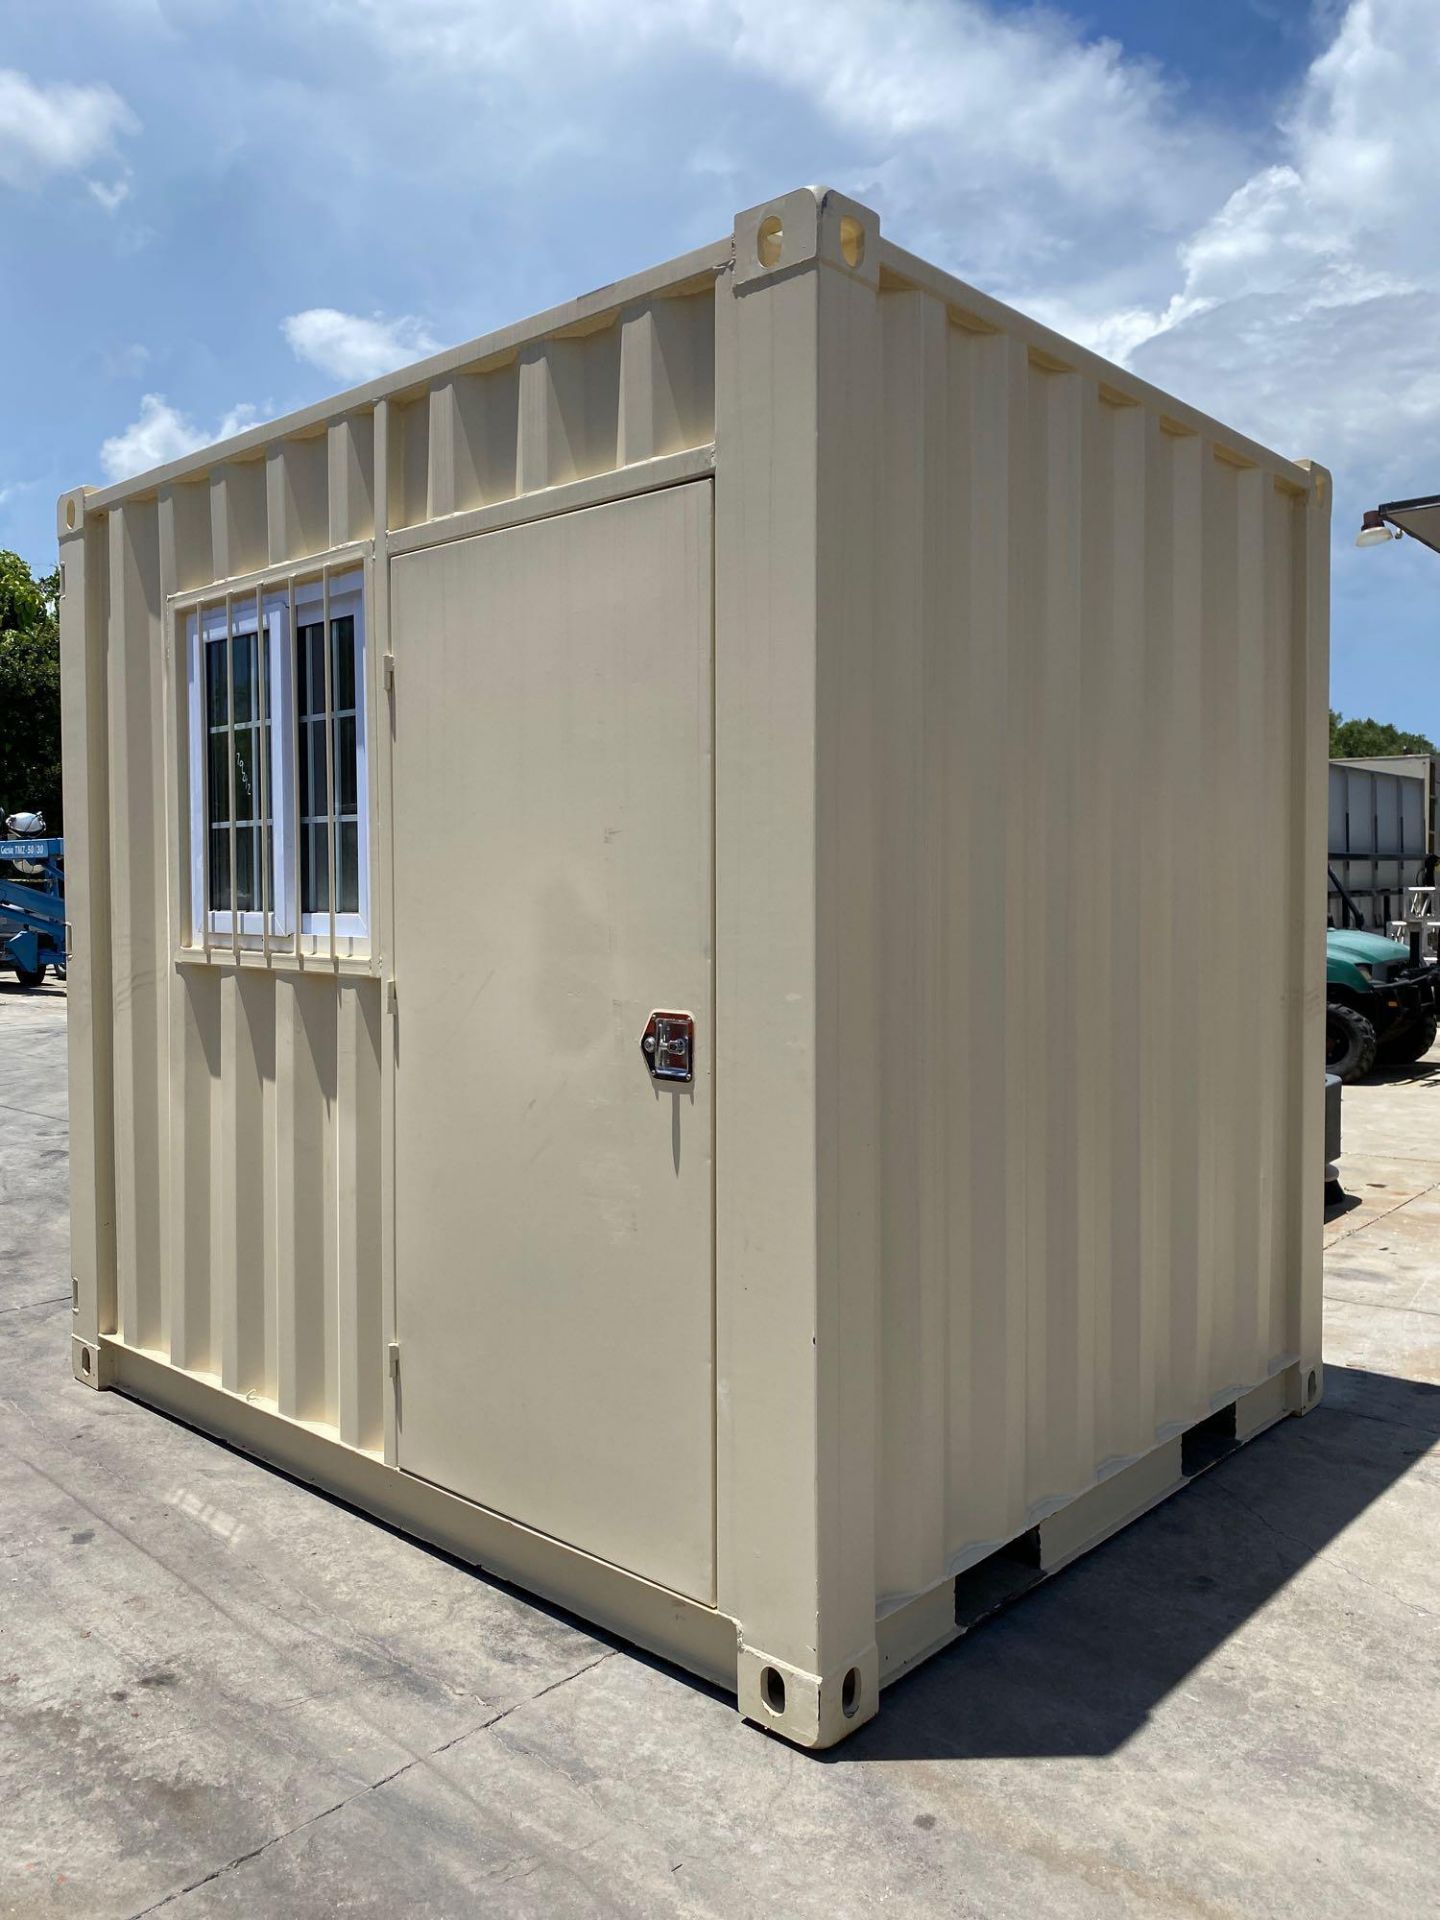 UNUSED 2020 PORTABLE OFFICE CONTAINER WITH WINDOW & SIDE DOOR. - Image 3 of 6